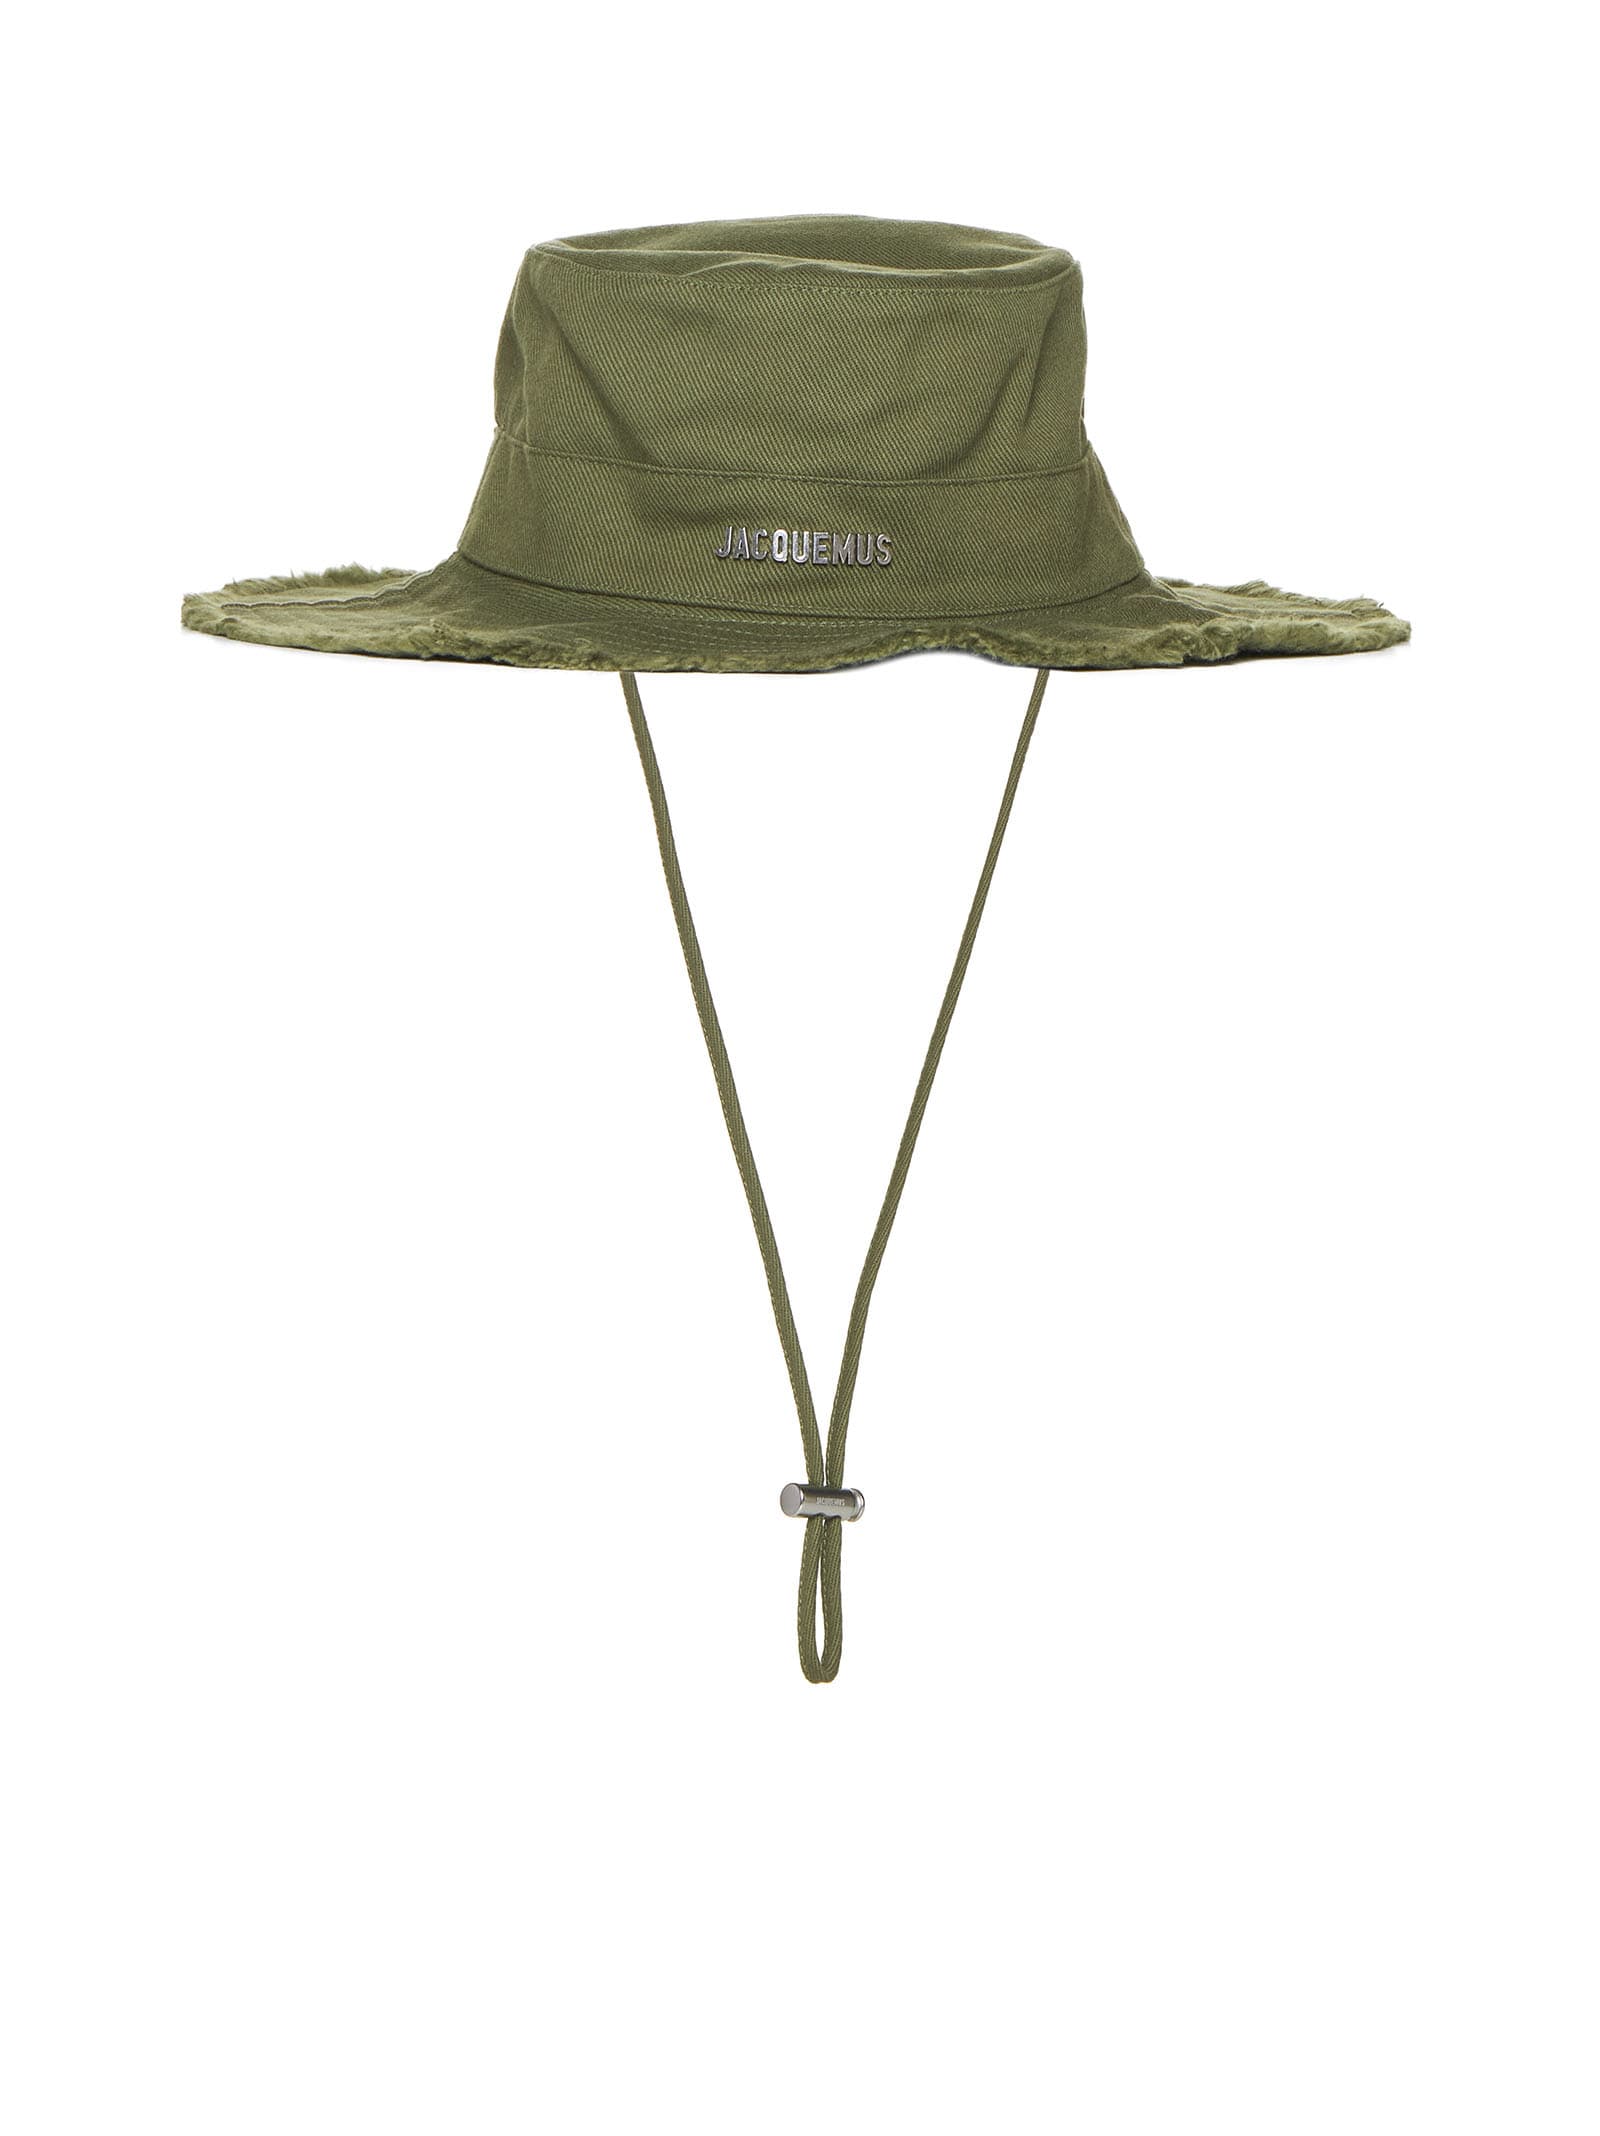 Jacquemus Hat In Green